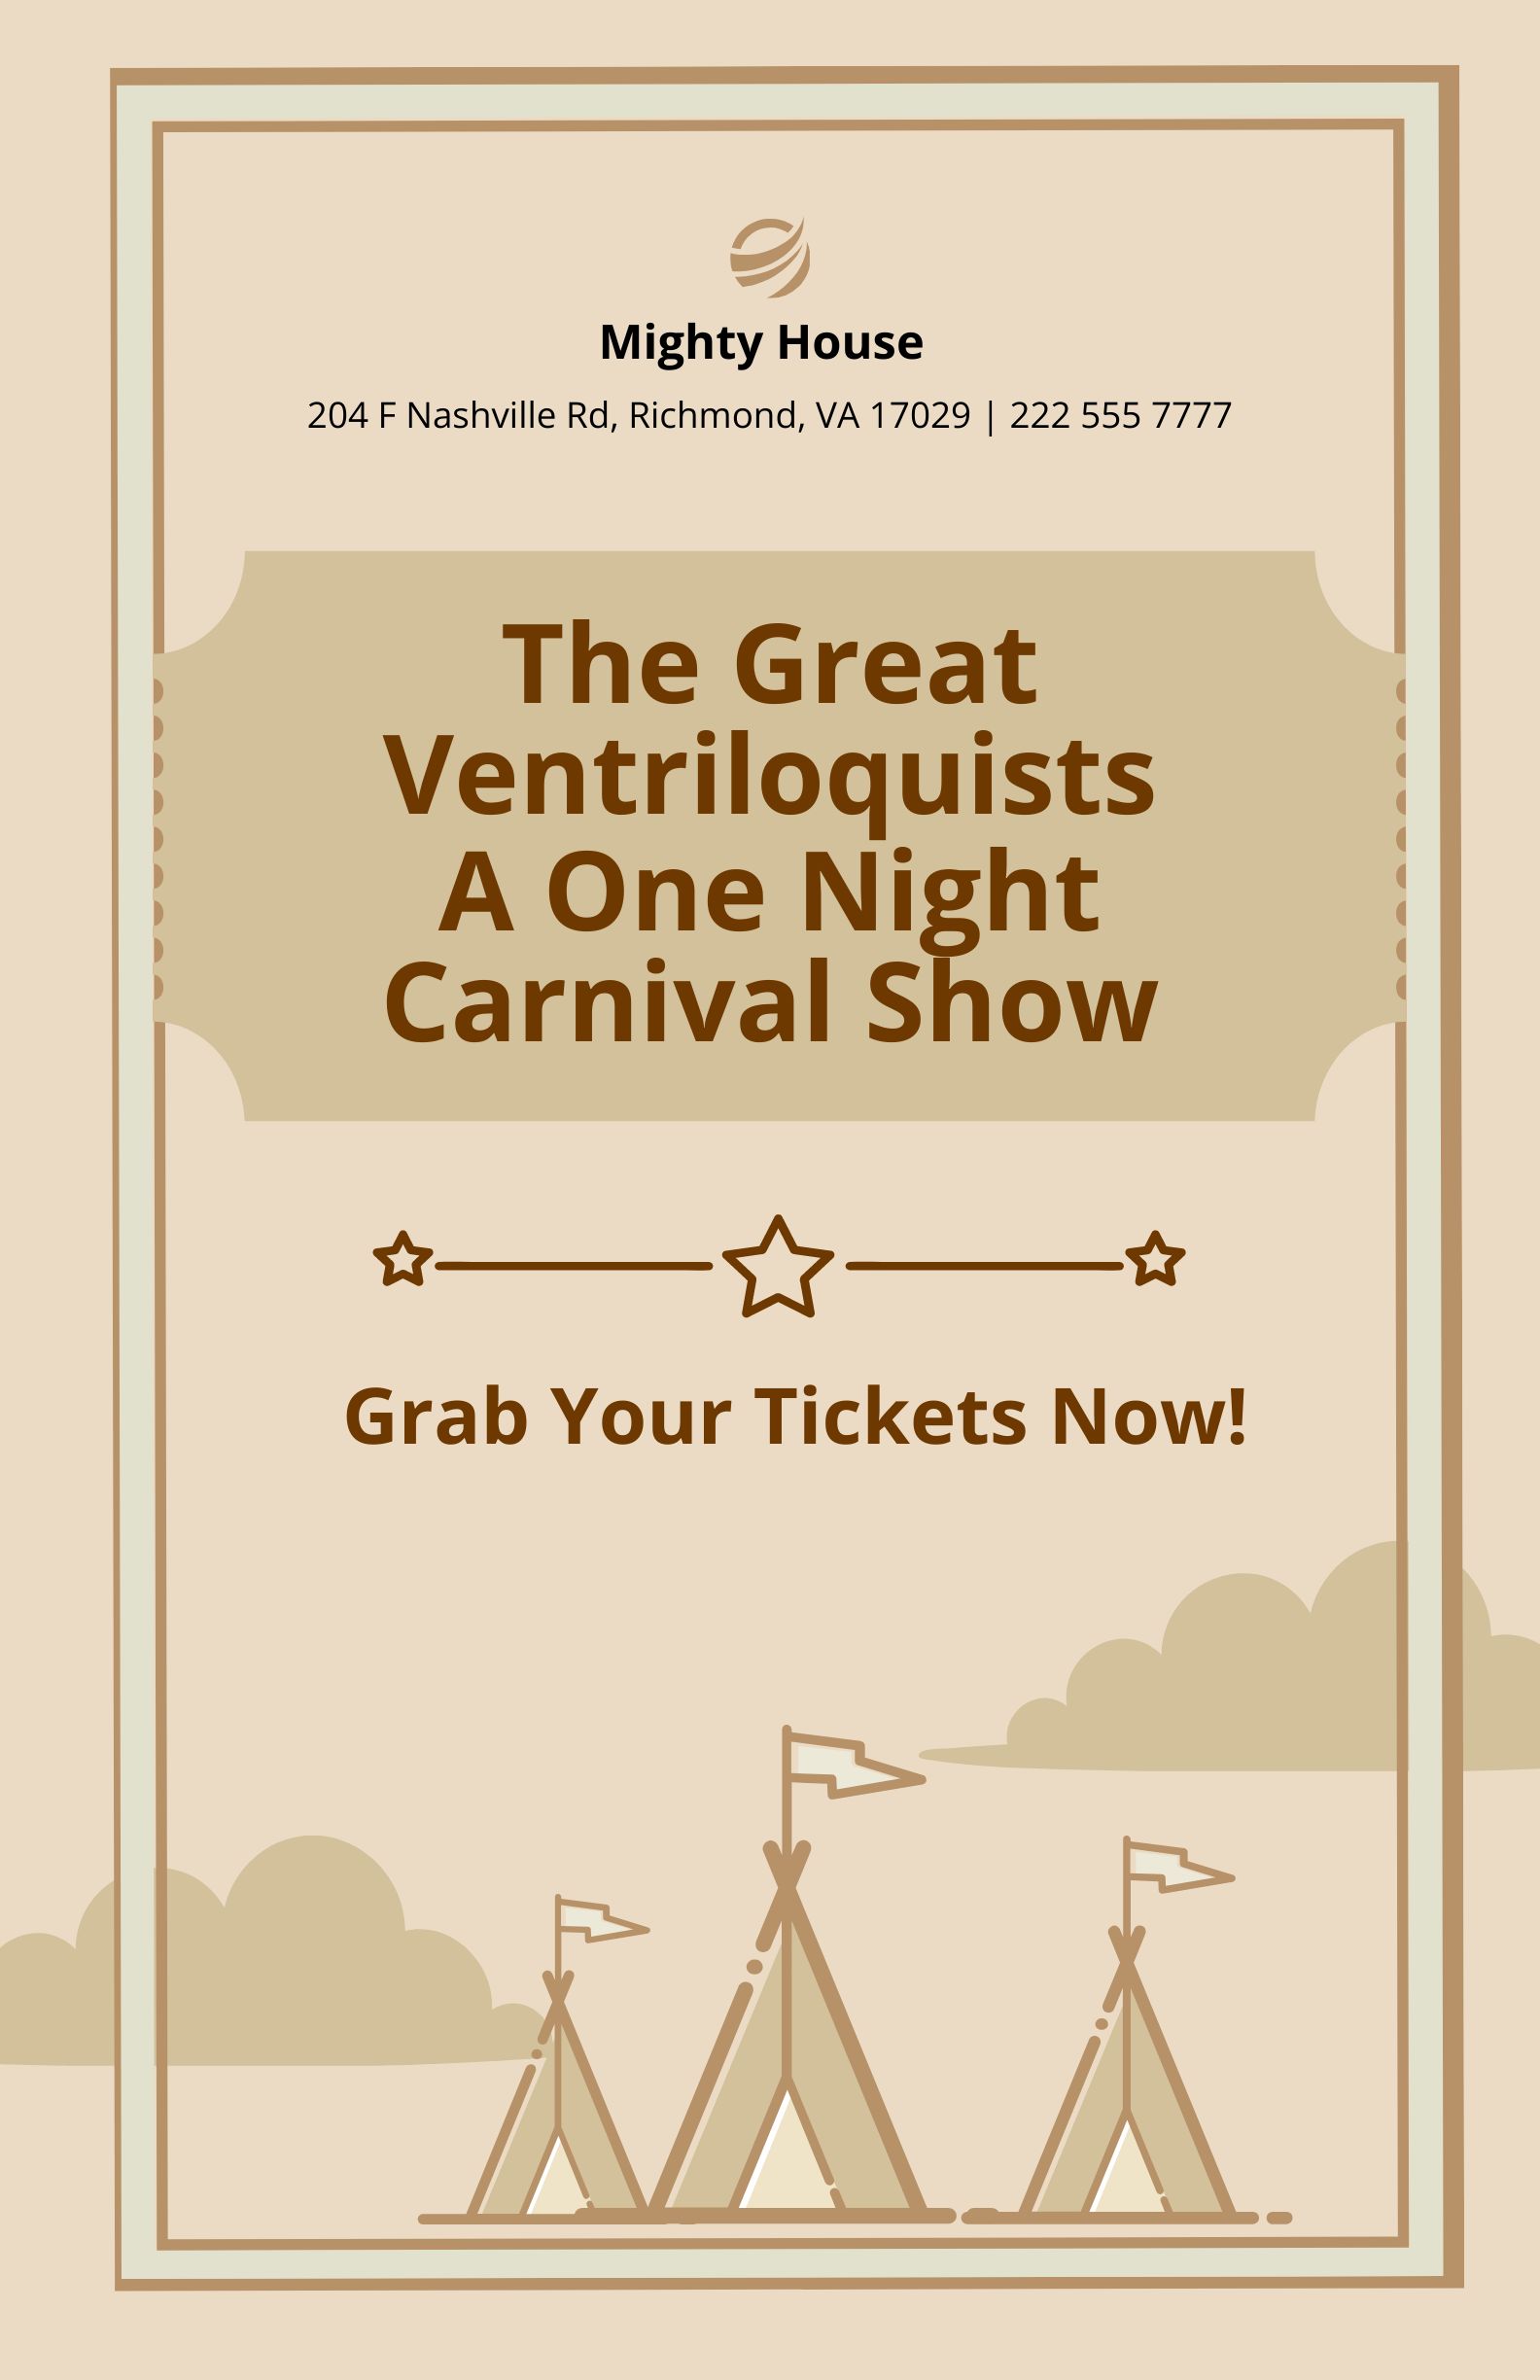 Circus Tent Poster Template - Illustrator, Word, Apple Pages, PSD ...
